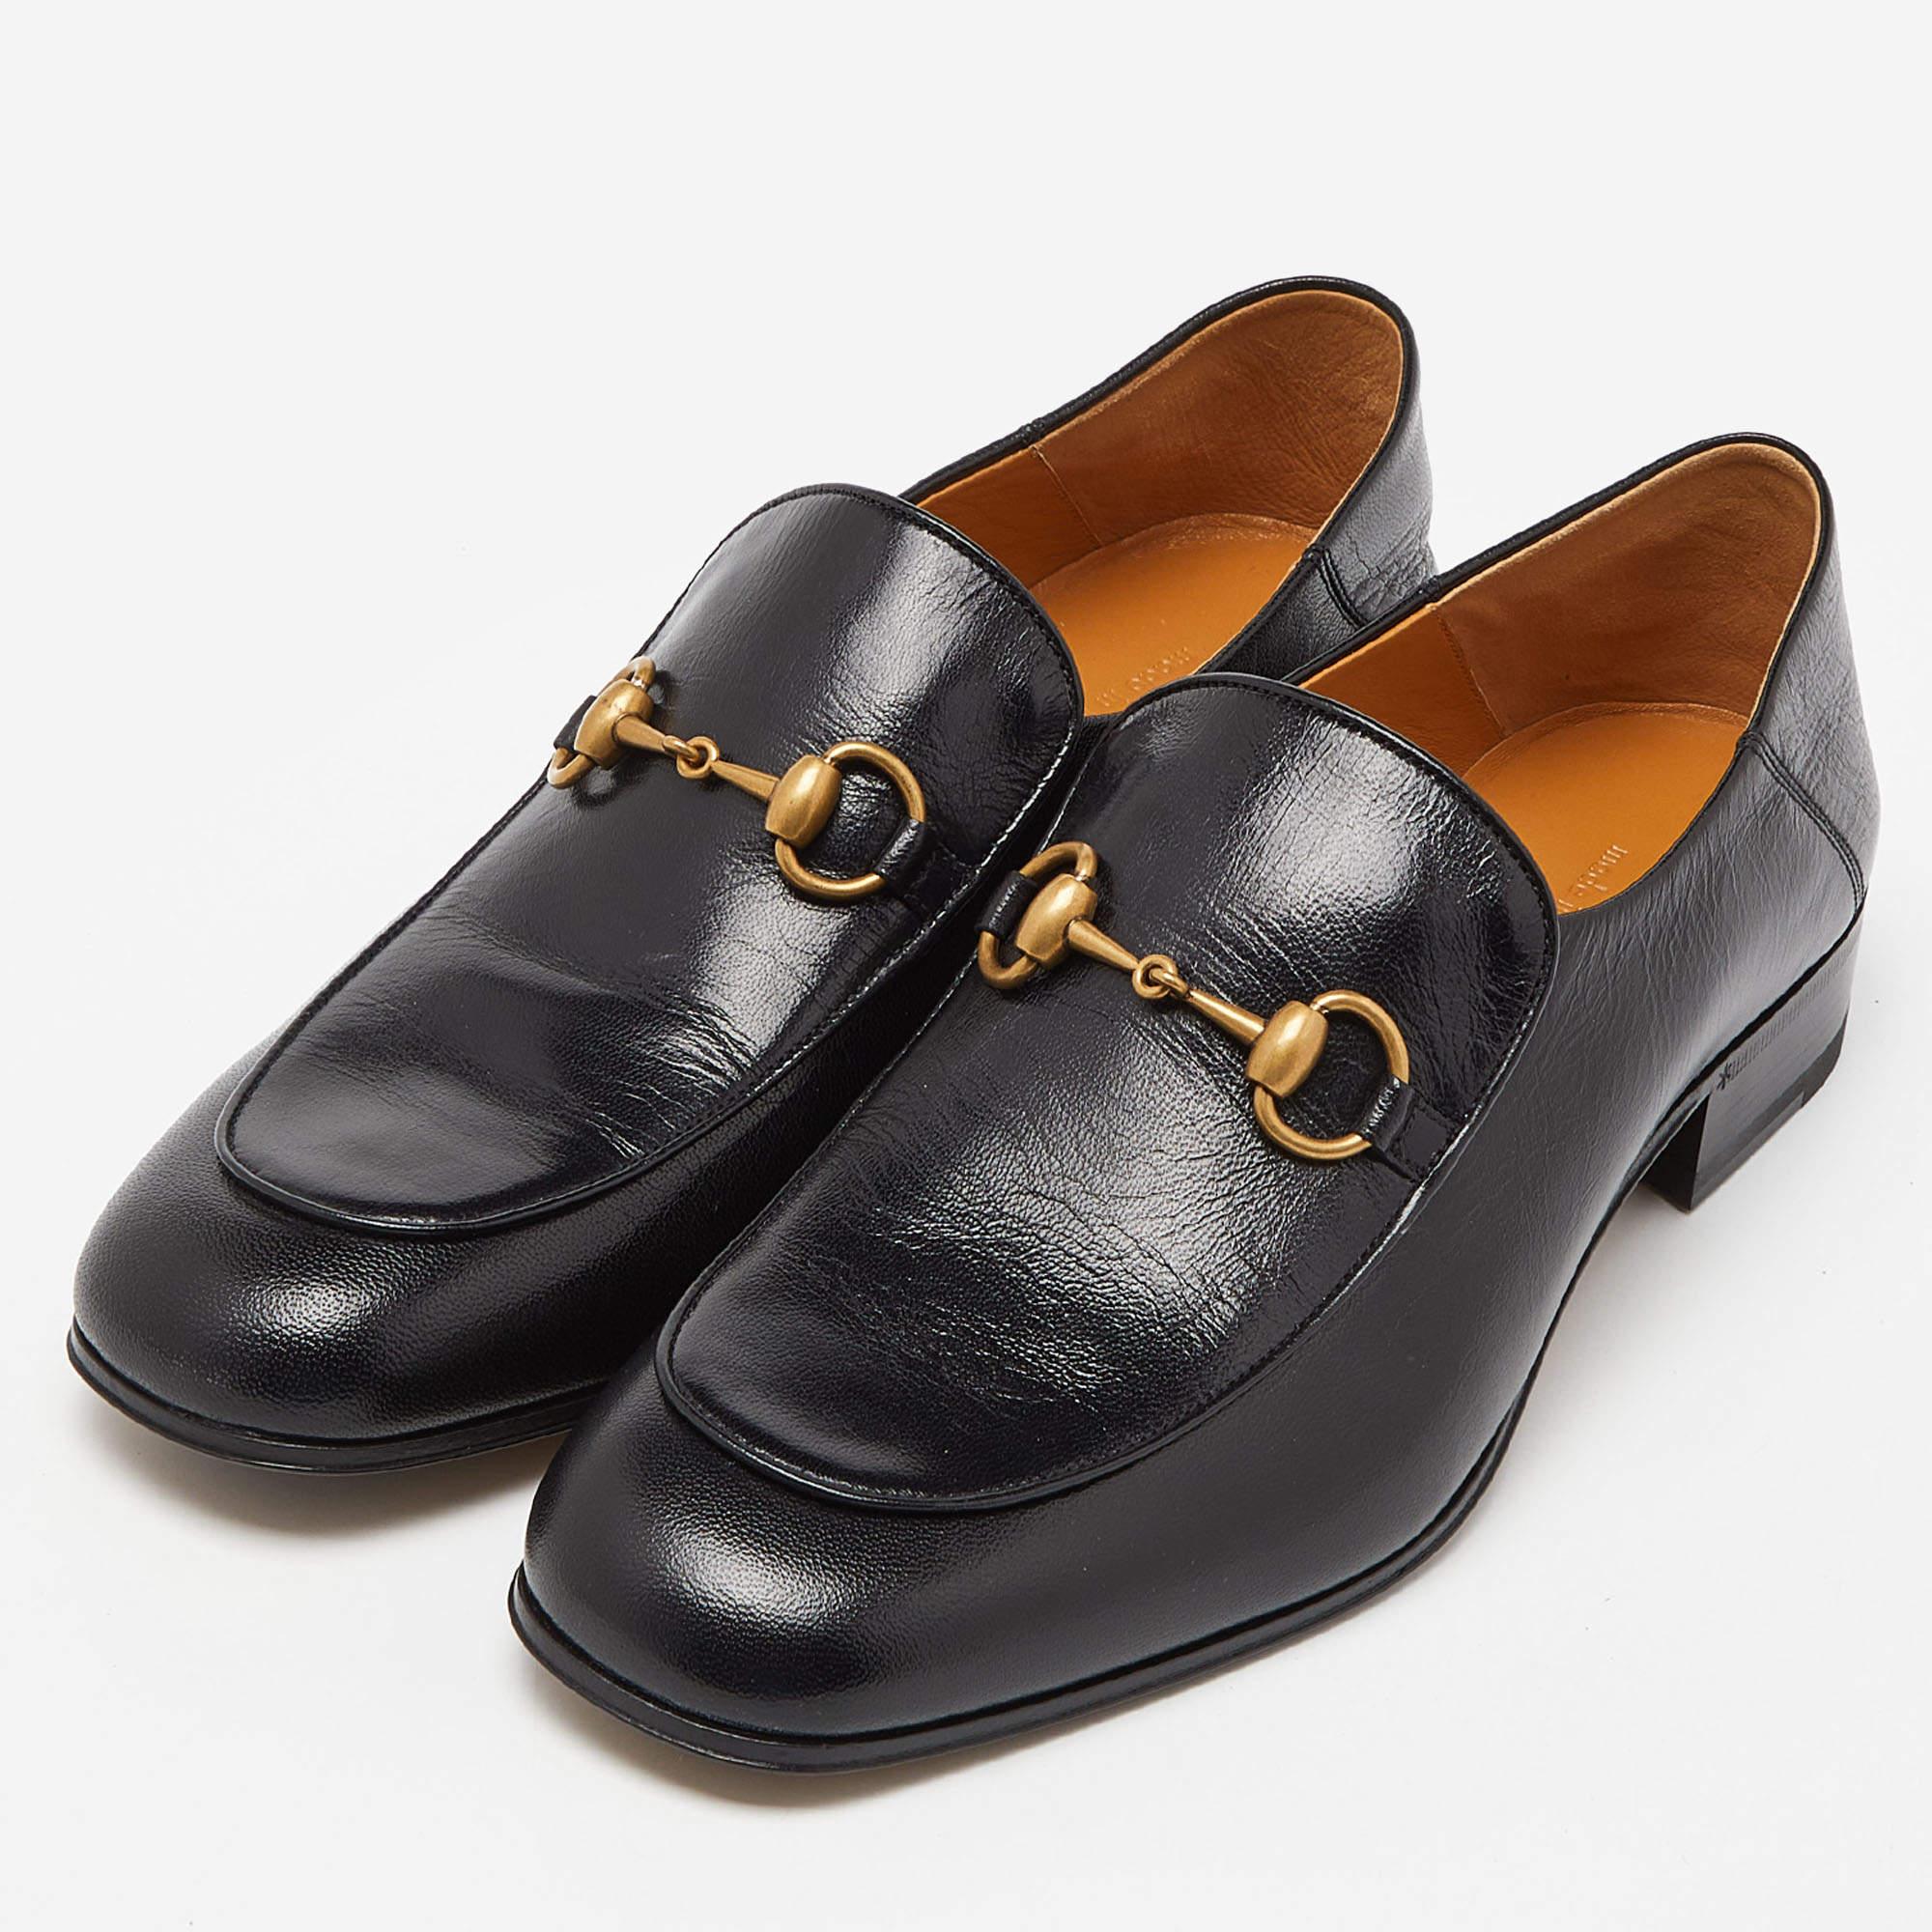 Move in style and comfort with this pair of loafers by Gucci. The shoes have been crafted from leather into a round-toe silhouette and highlighted with the Horsebit on the uppers.

